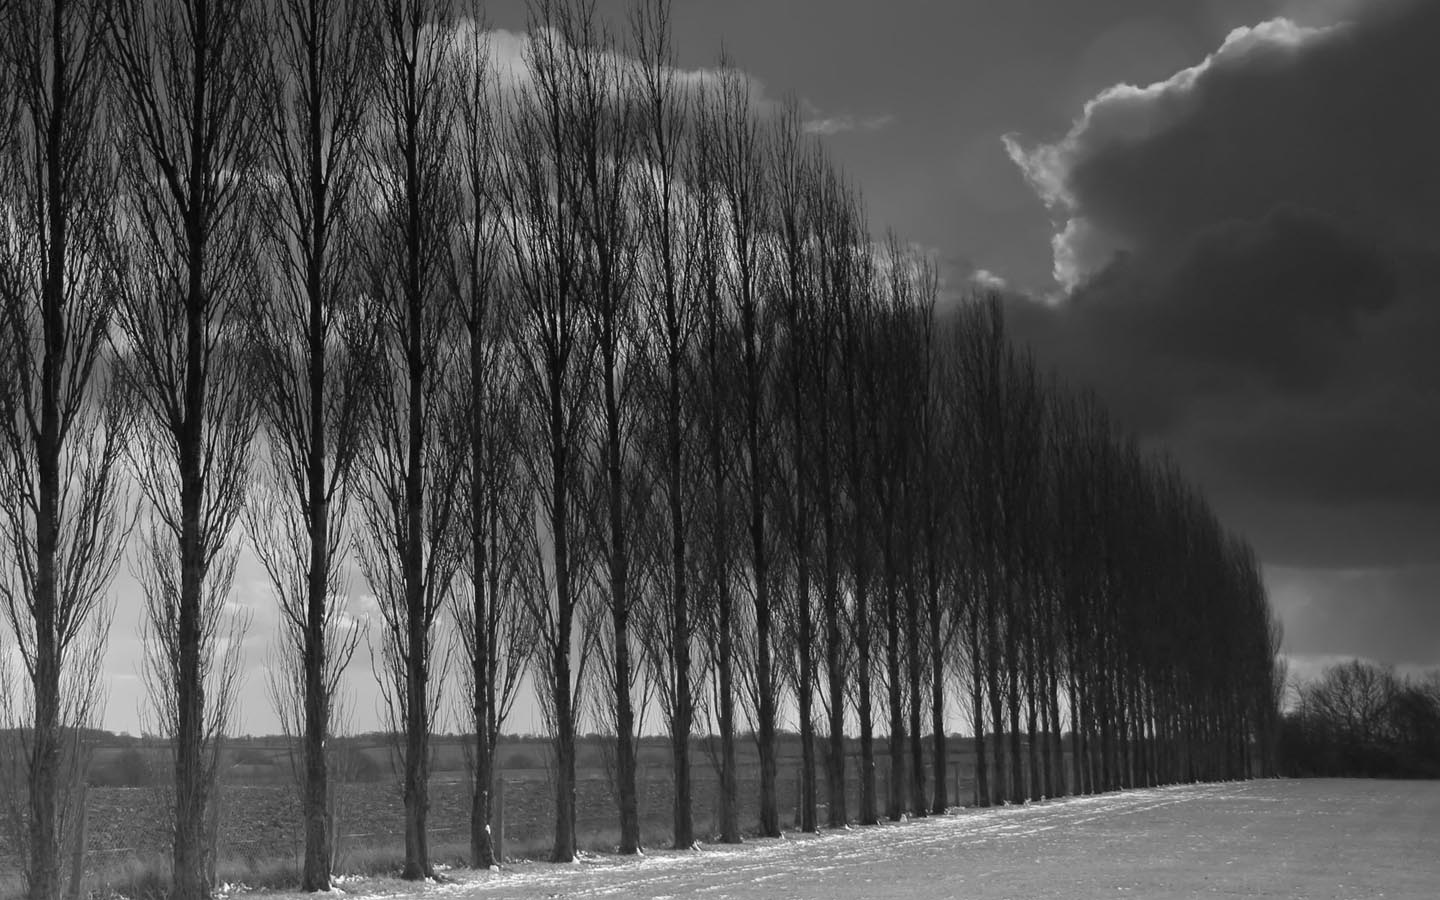 Black and White Wallpaper of a Row of Poplar Trees